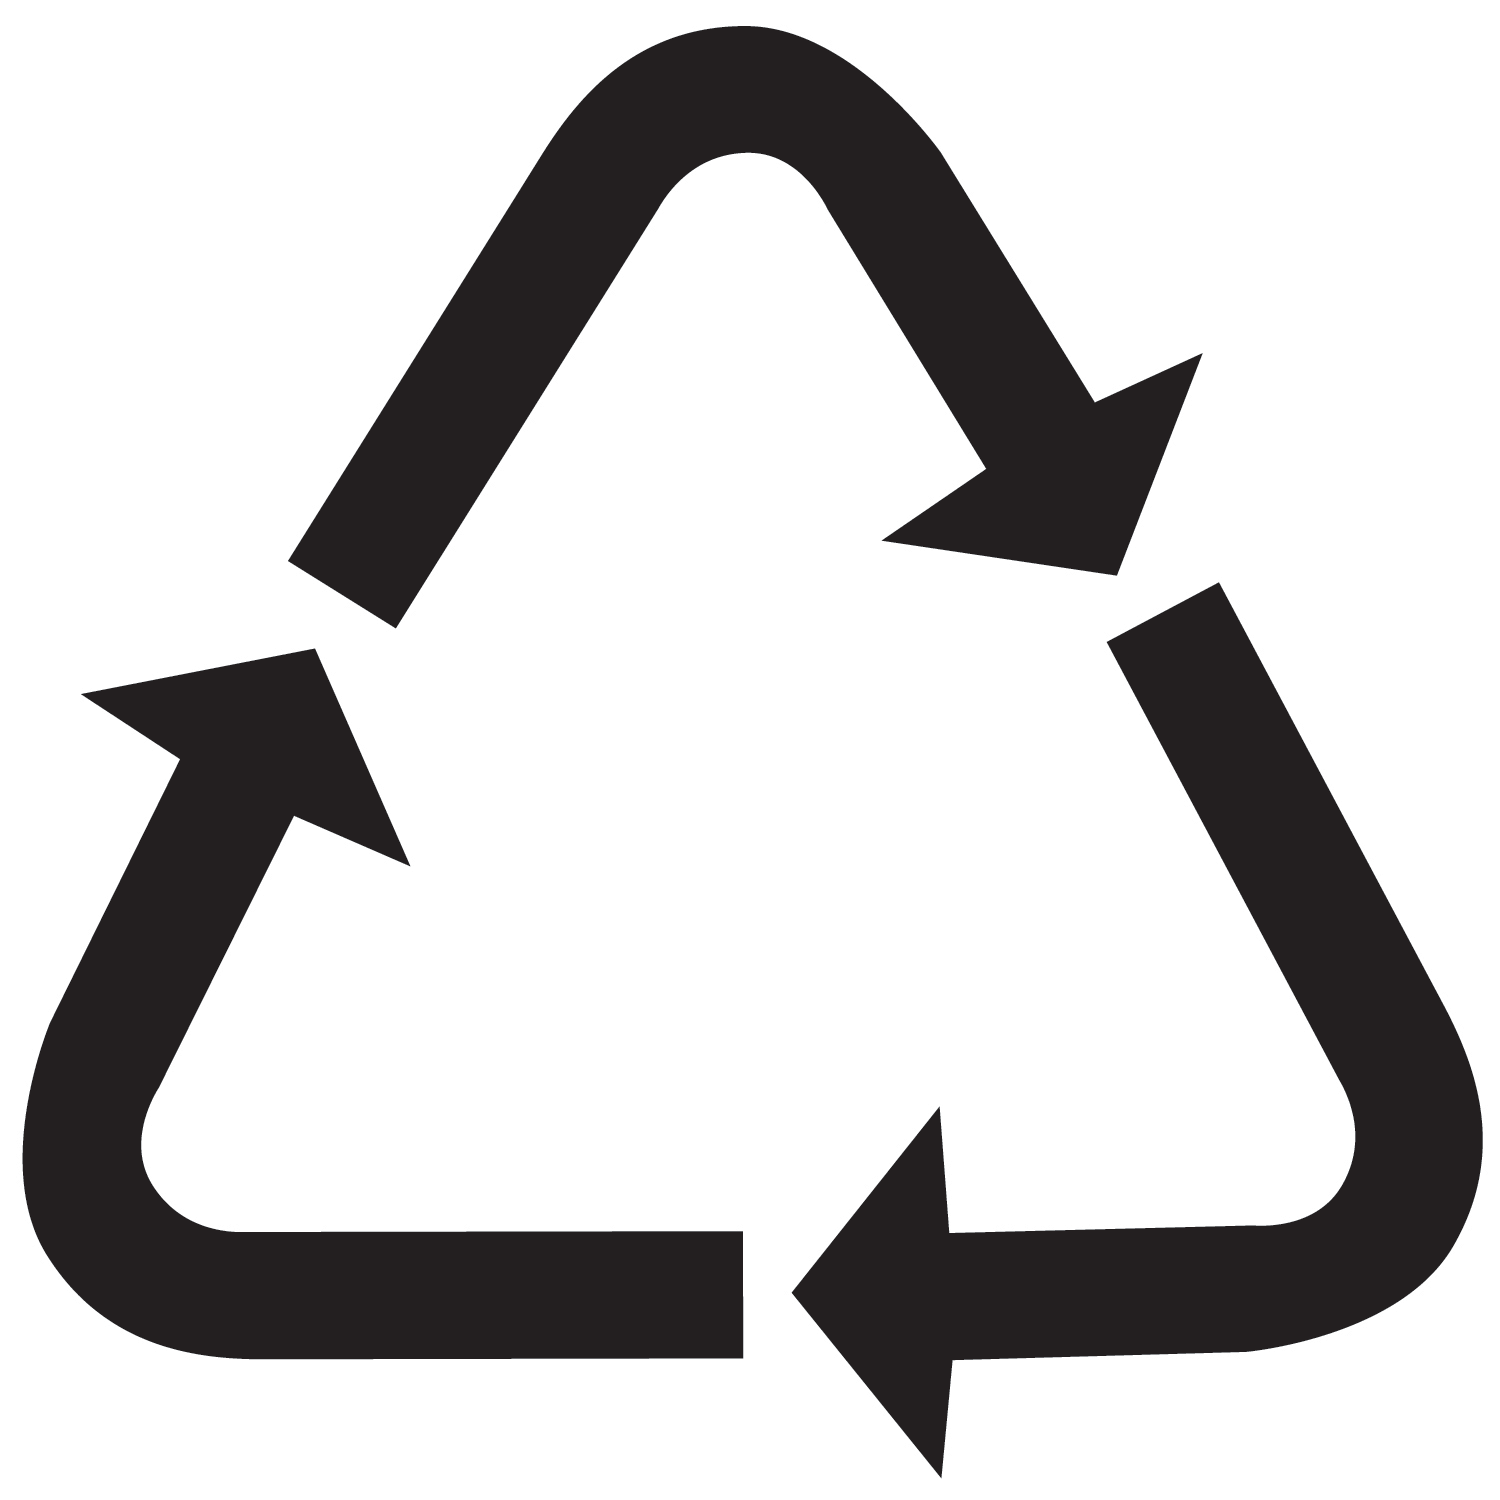 Recycle Logo - Free Recycling Symbol Printable, Download Free Clip Art, Free Clip ...